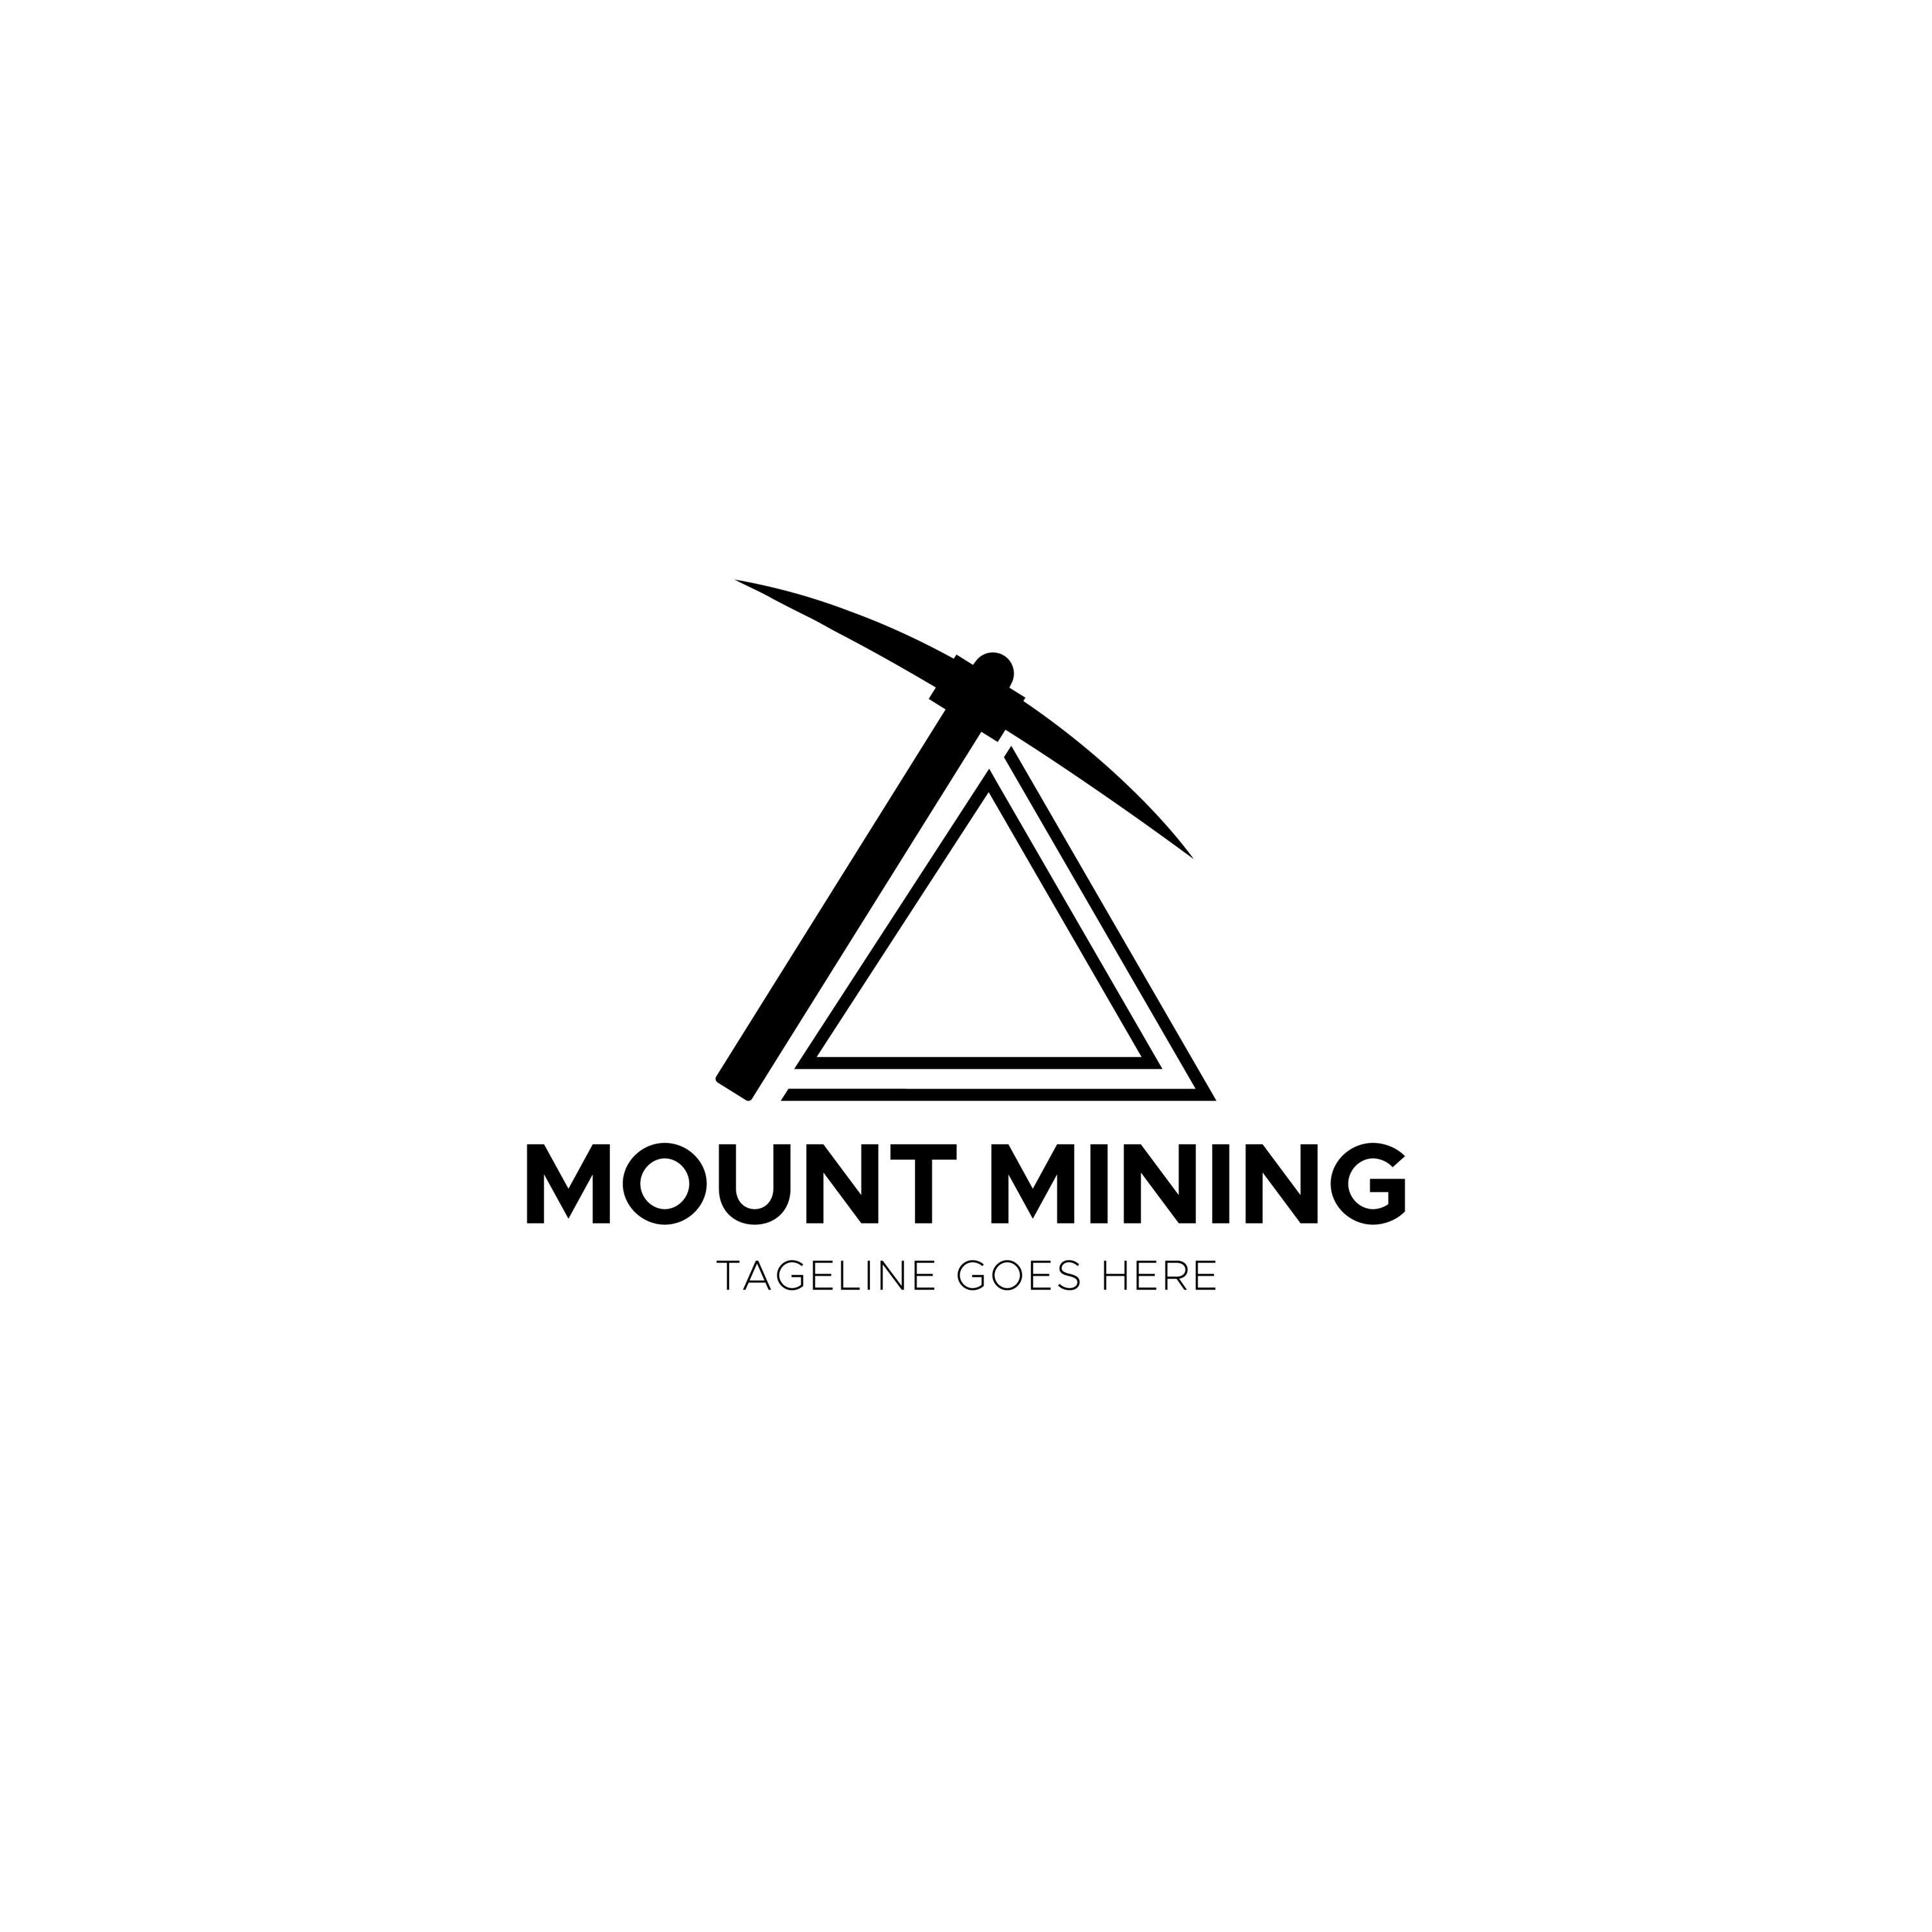 Mount Mining Construction Black Company Logo Template cover image.